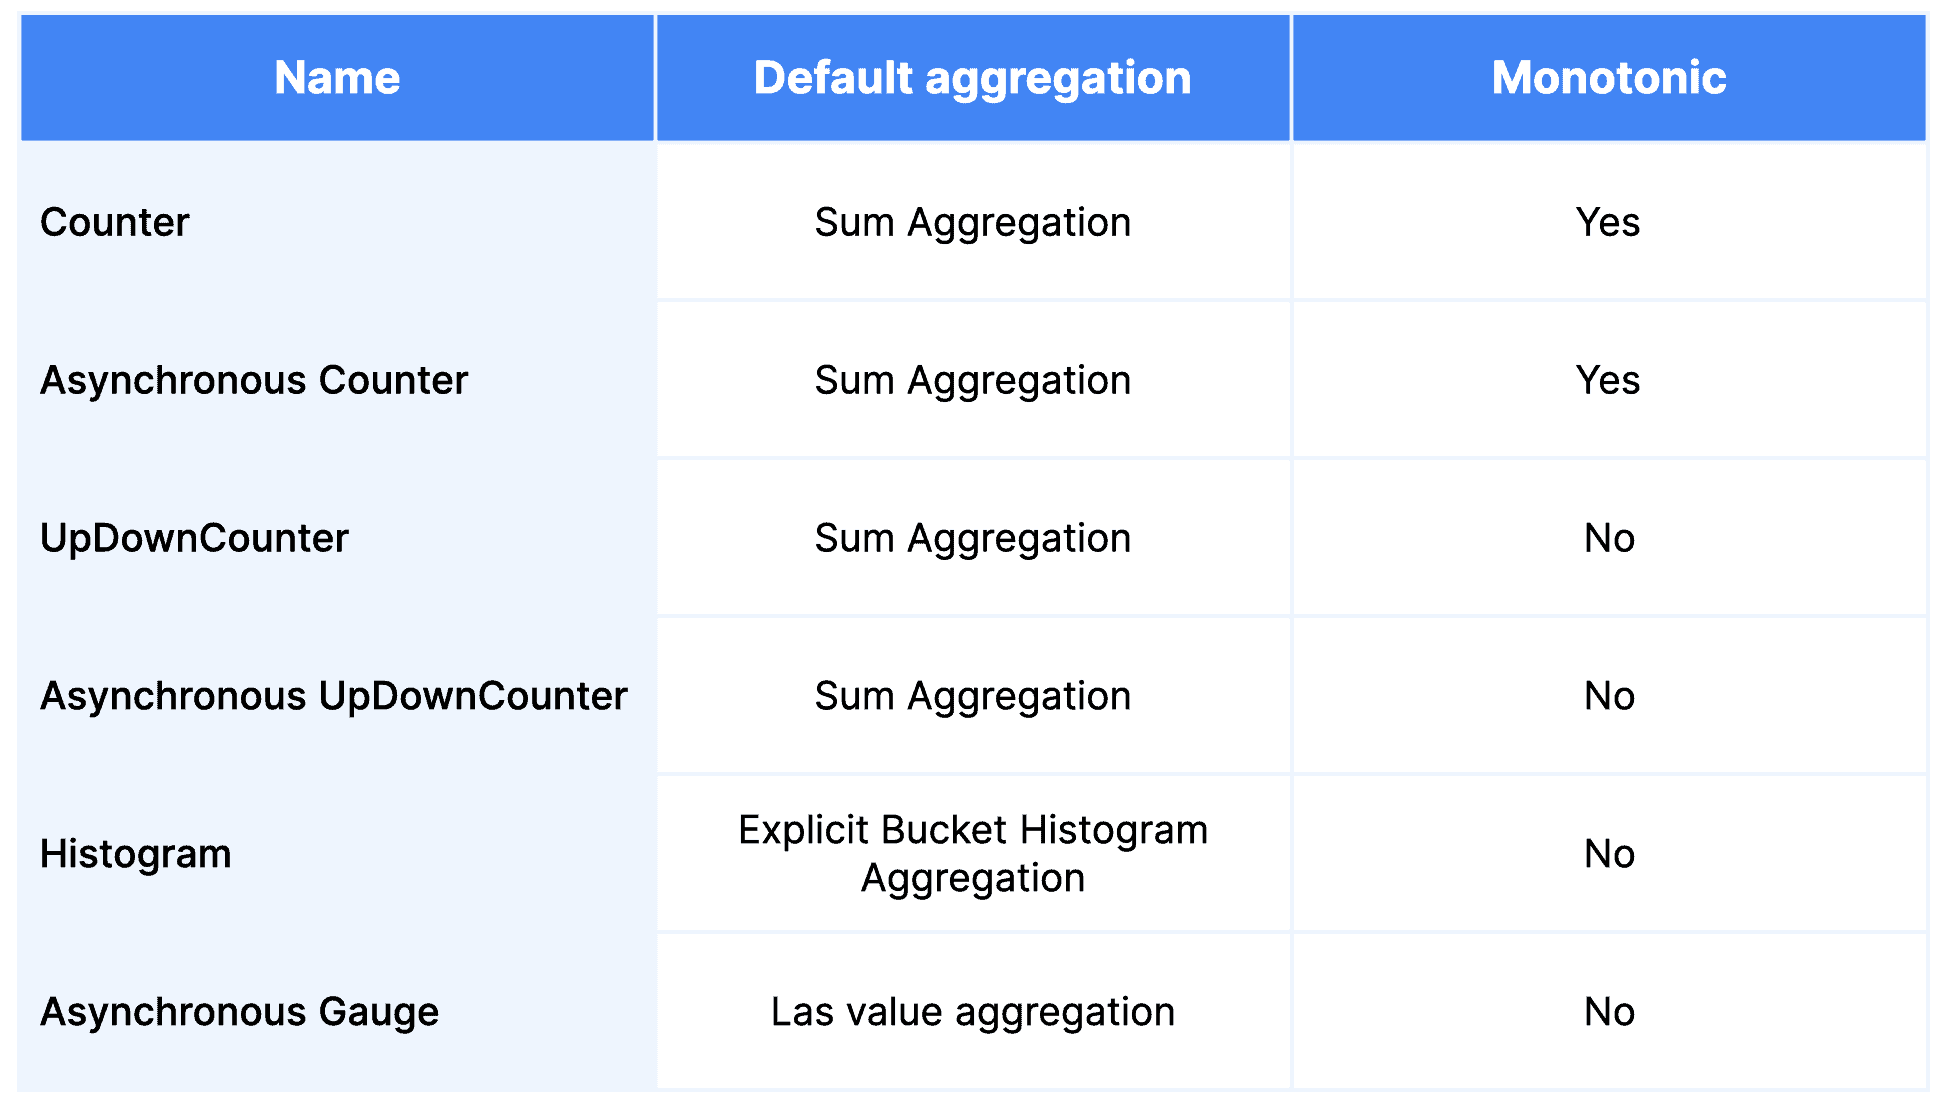 Table outlining the default aggregation for each OpenTelemetry instrument type